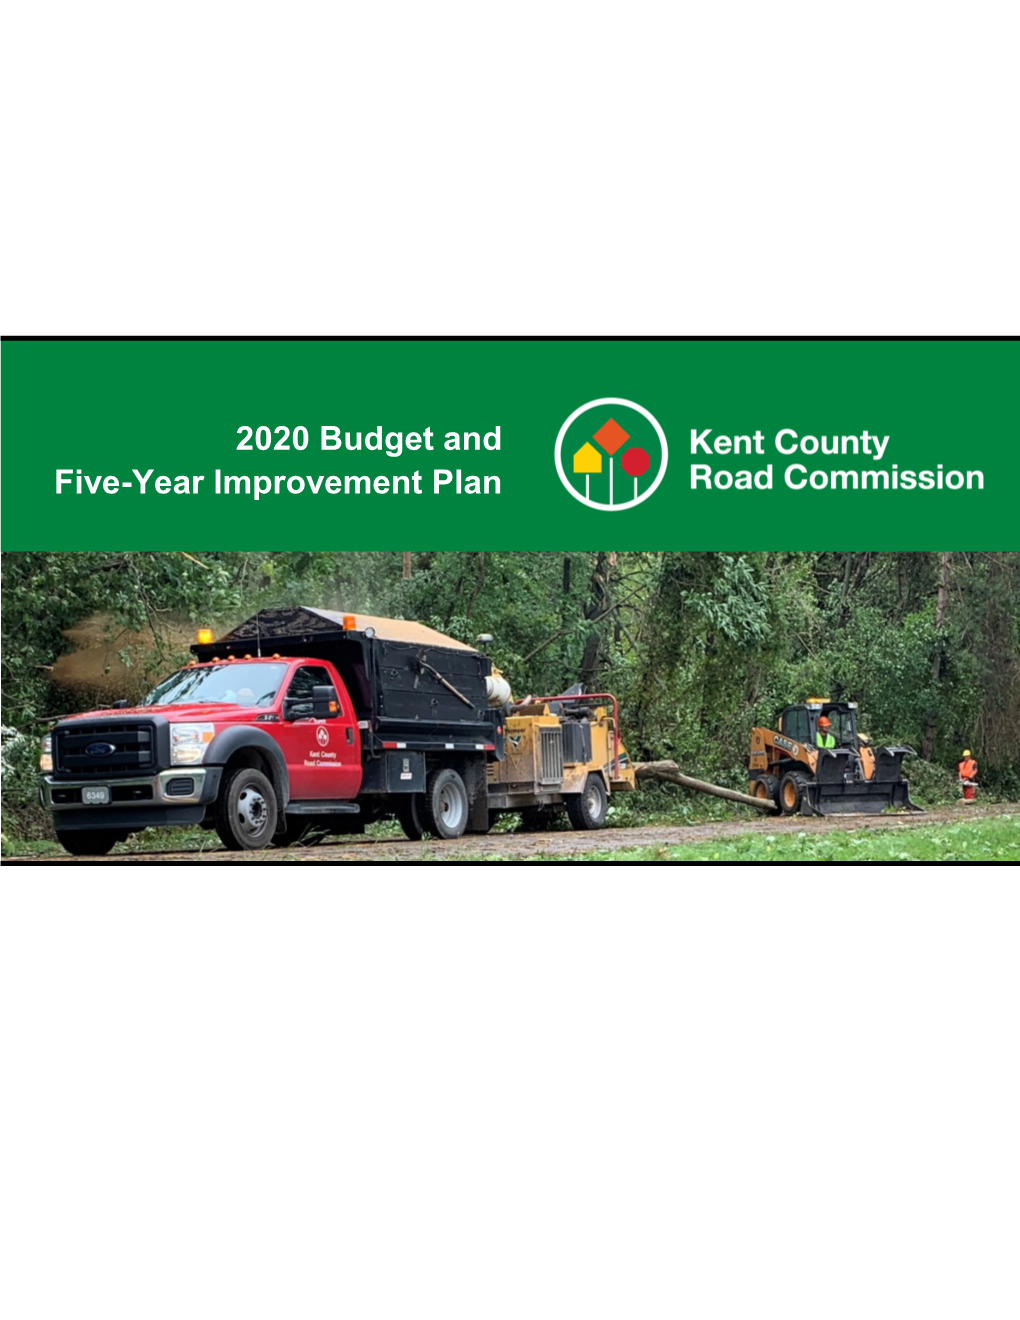 2020 Budget and Five-Year Improvement Plan